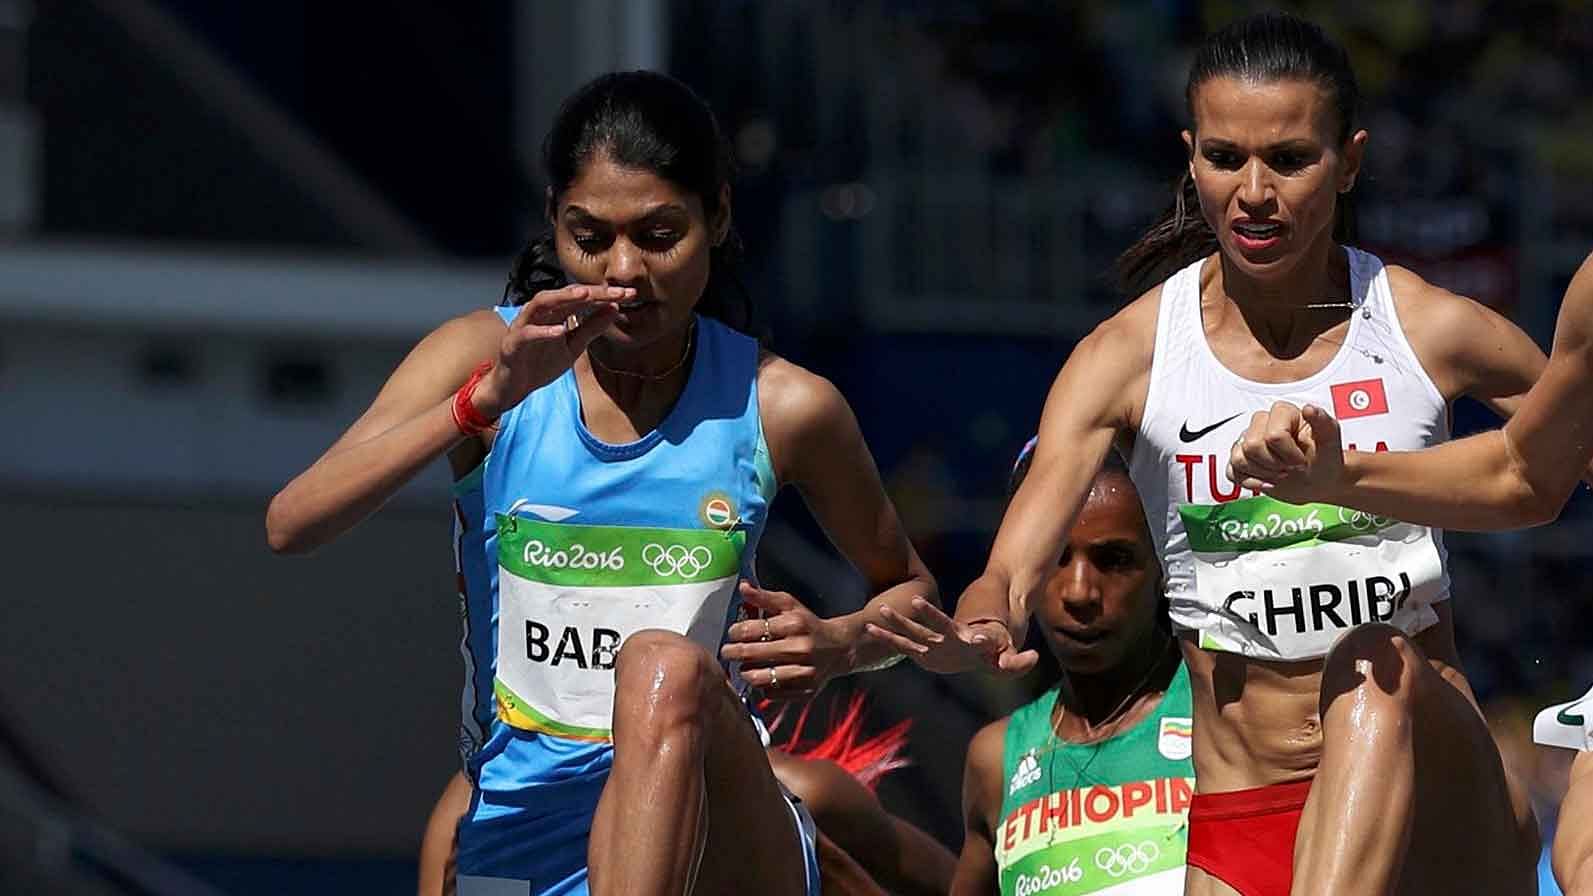 Lalita Babar finished 10th in the 3000m steeplechase finals. (Photo: Reuters)